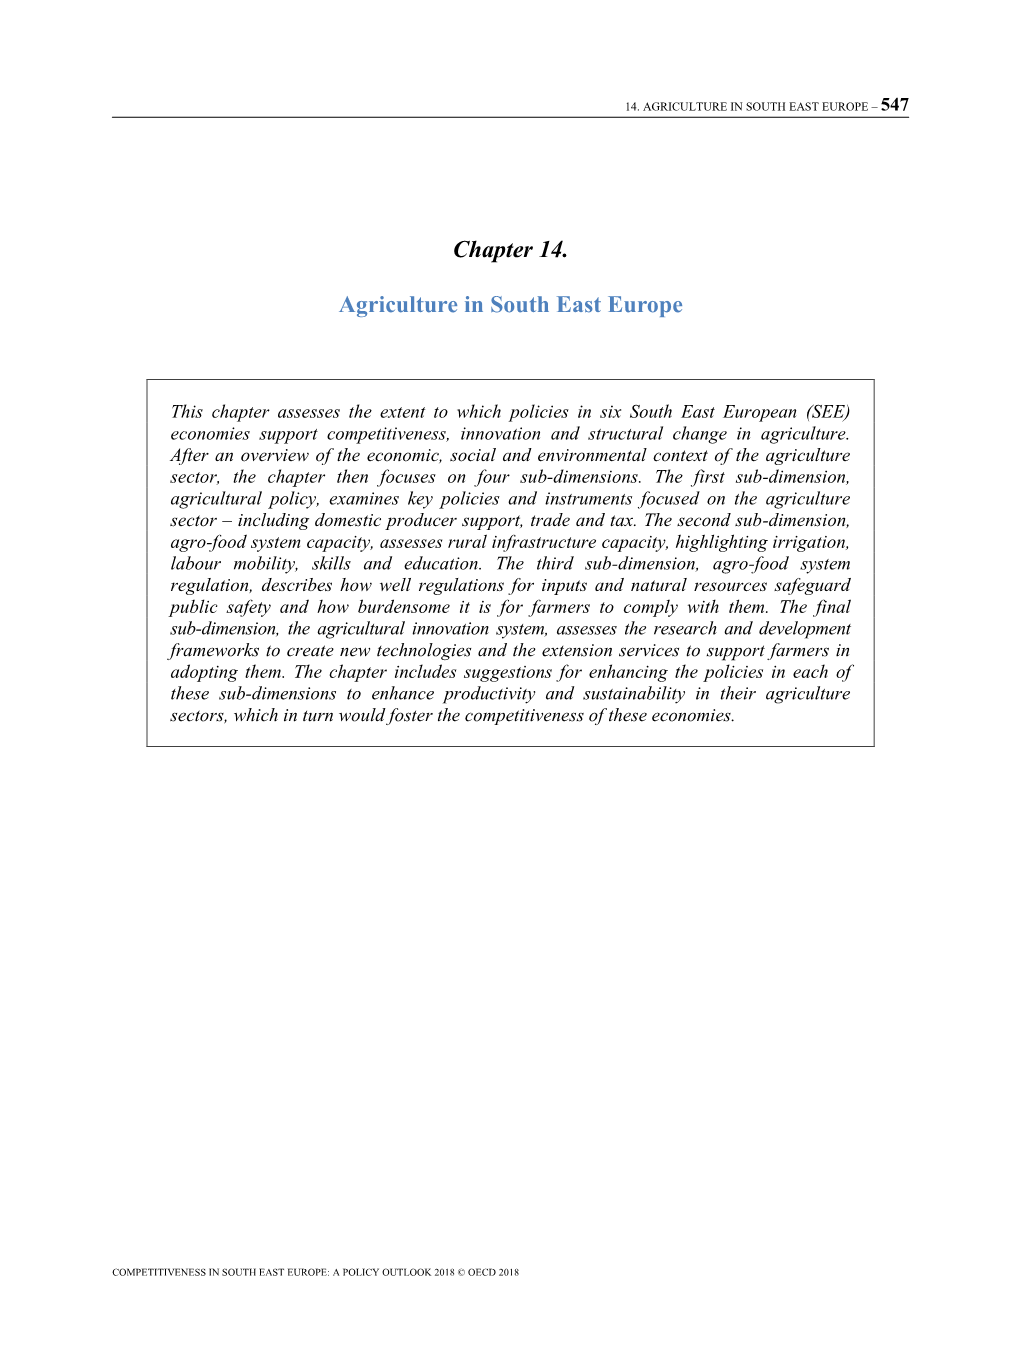 Chapter 14. Agriculture in South East Europe